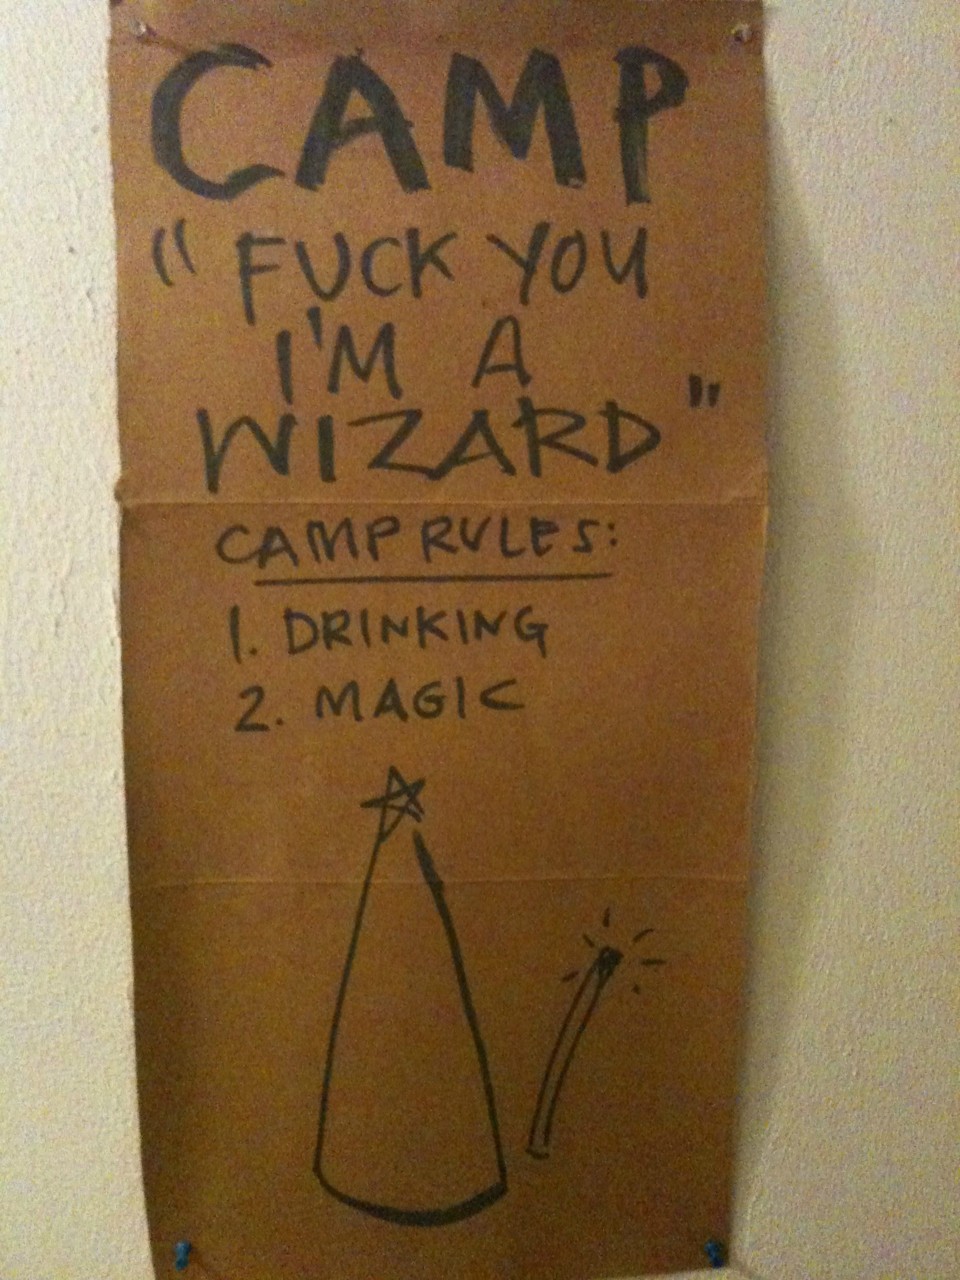 I want in on this wizard camp.